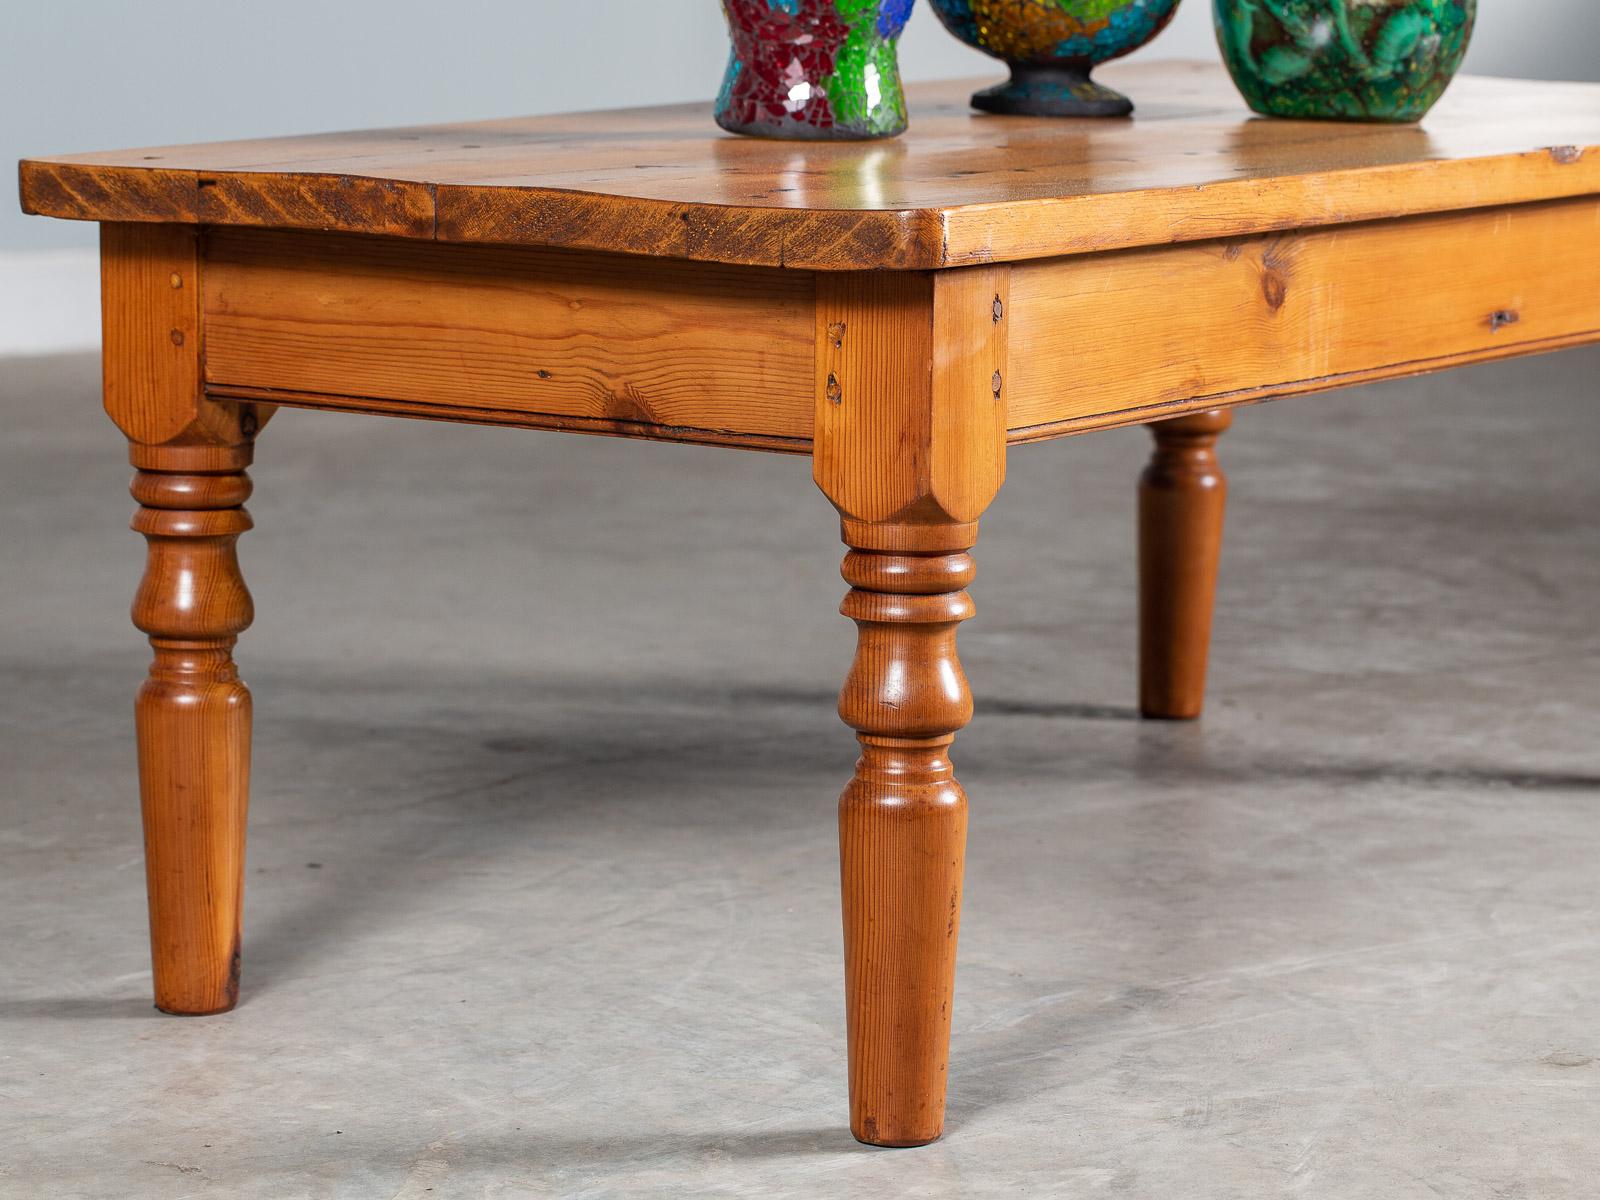 19th Century Antique English Pine Coffee Table Turned Legs, circa 1875 For Sale